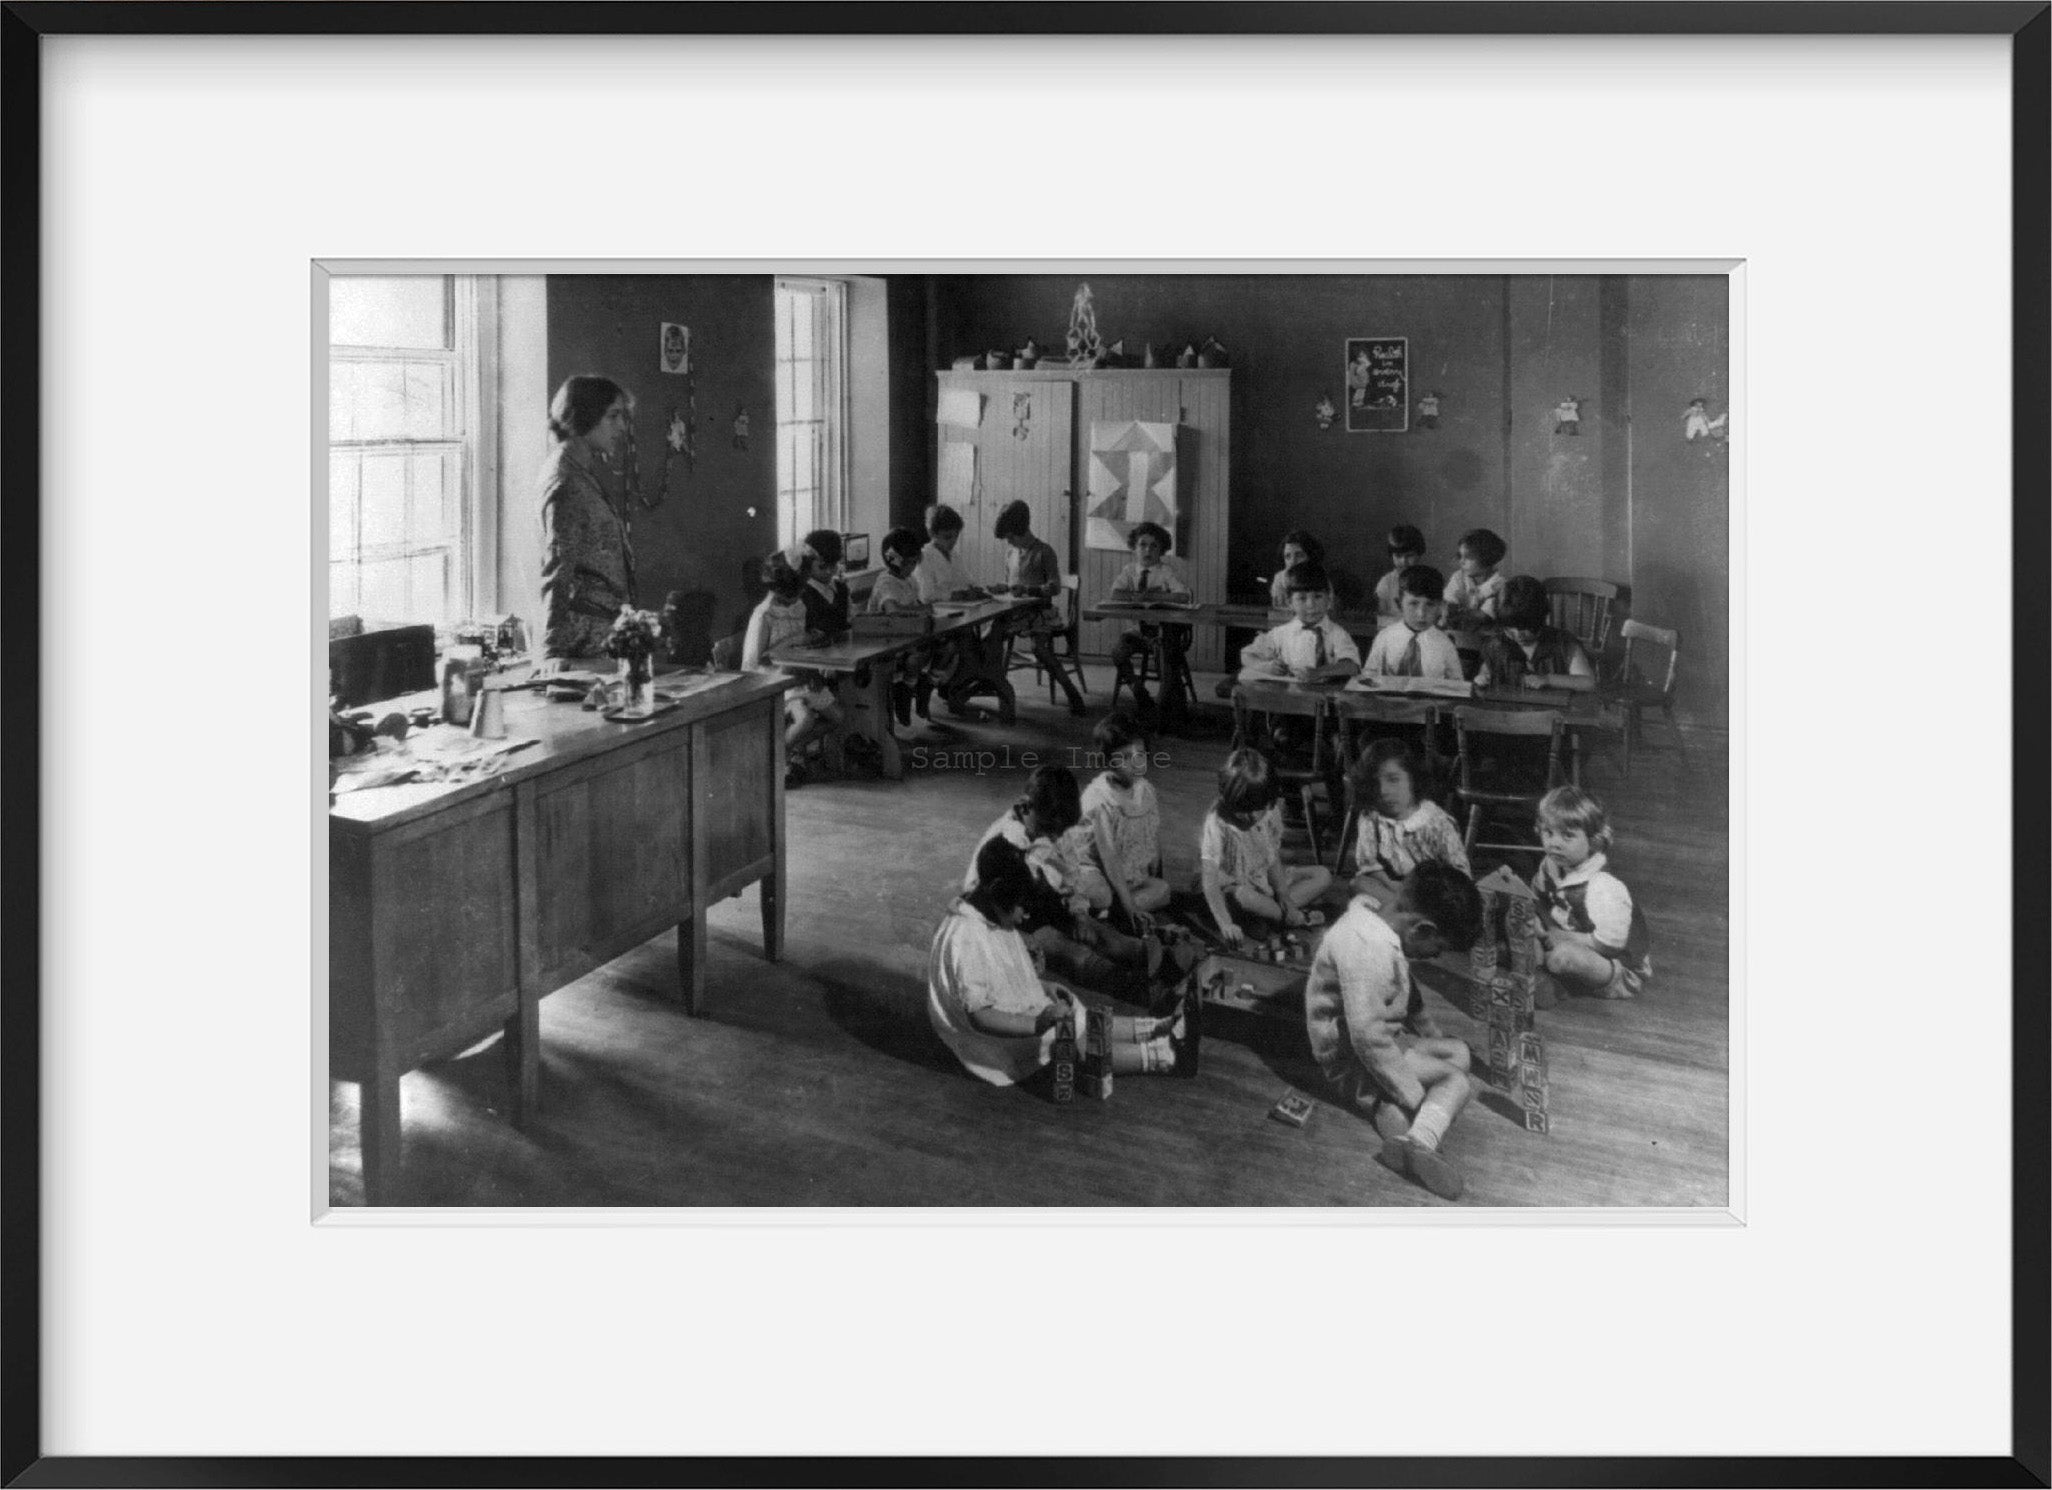 ca. 192-? photograph of "Amalgamated clothing workers cooperative apartment. Kin